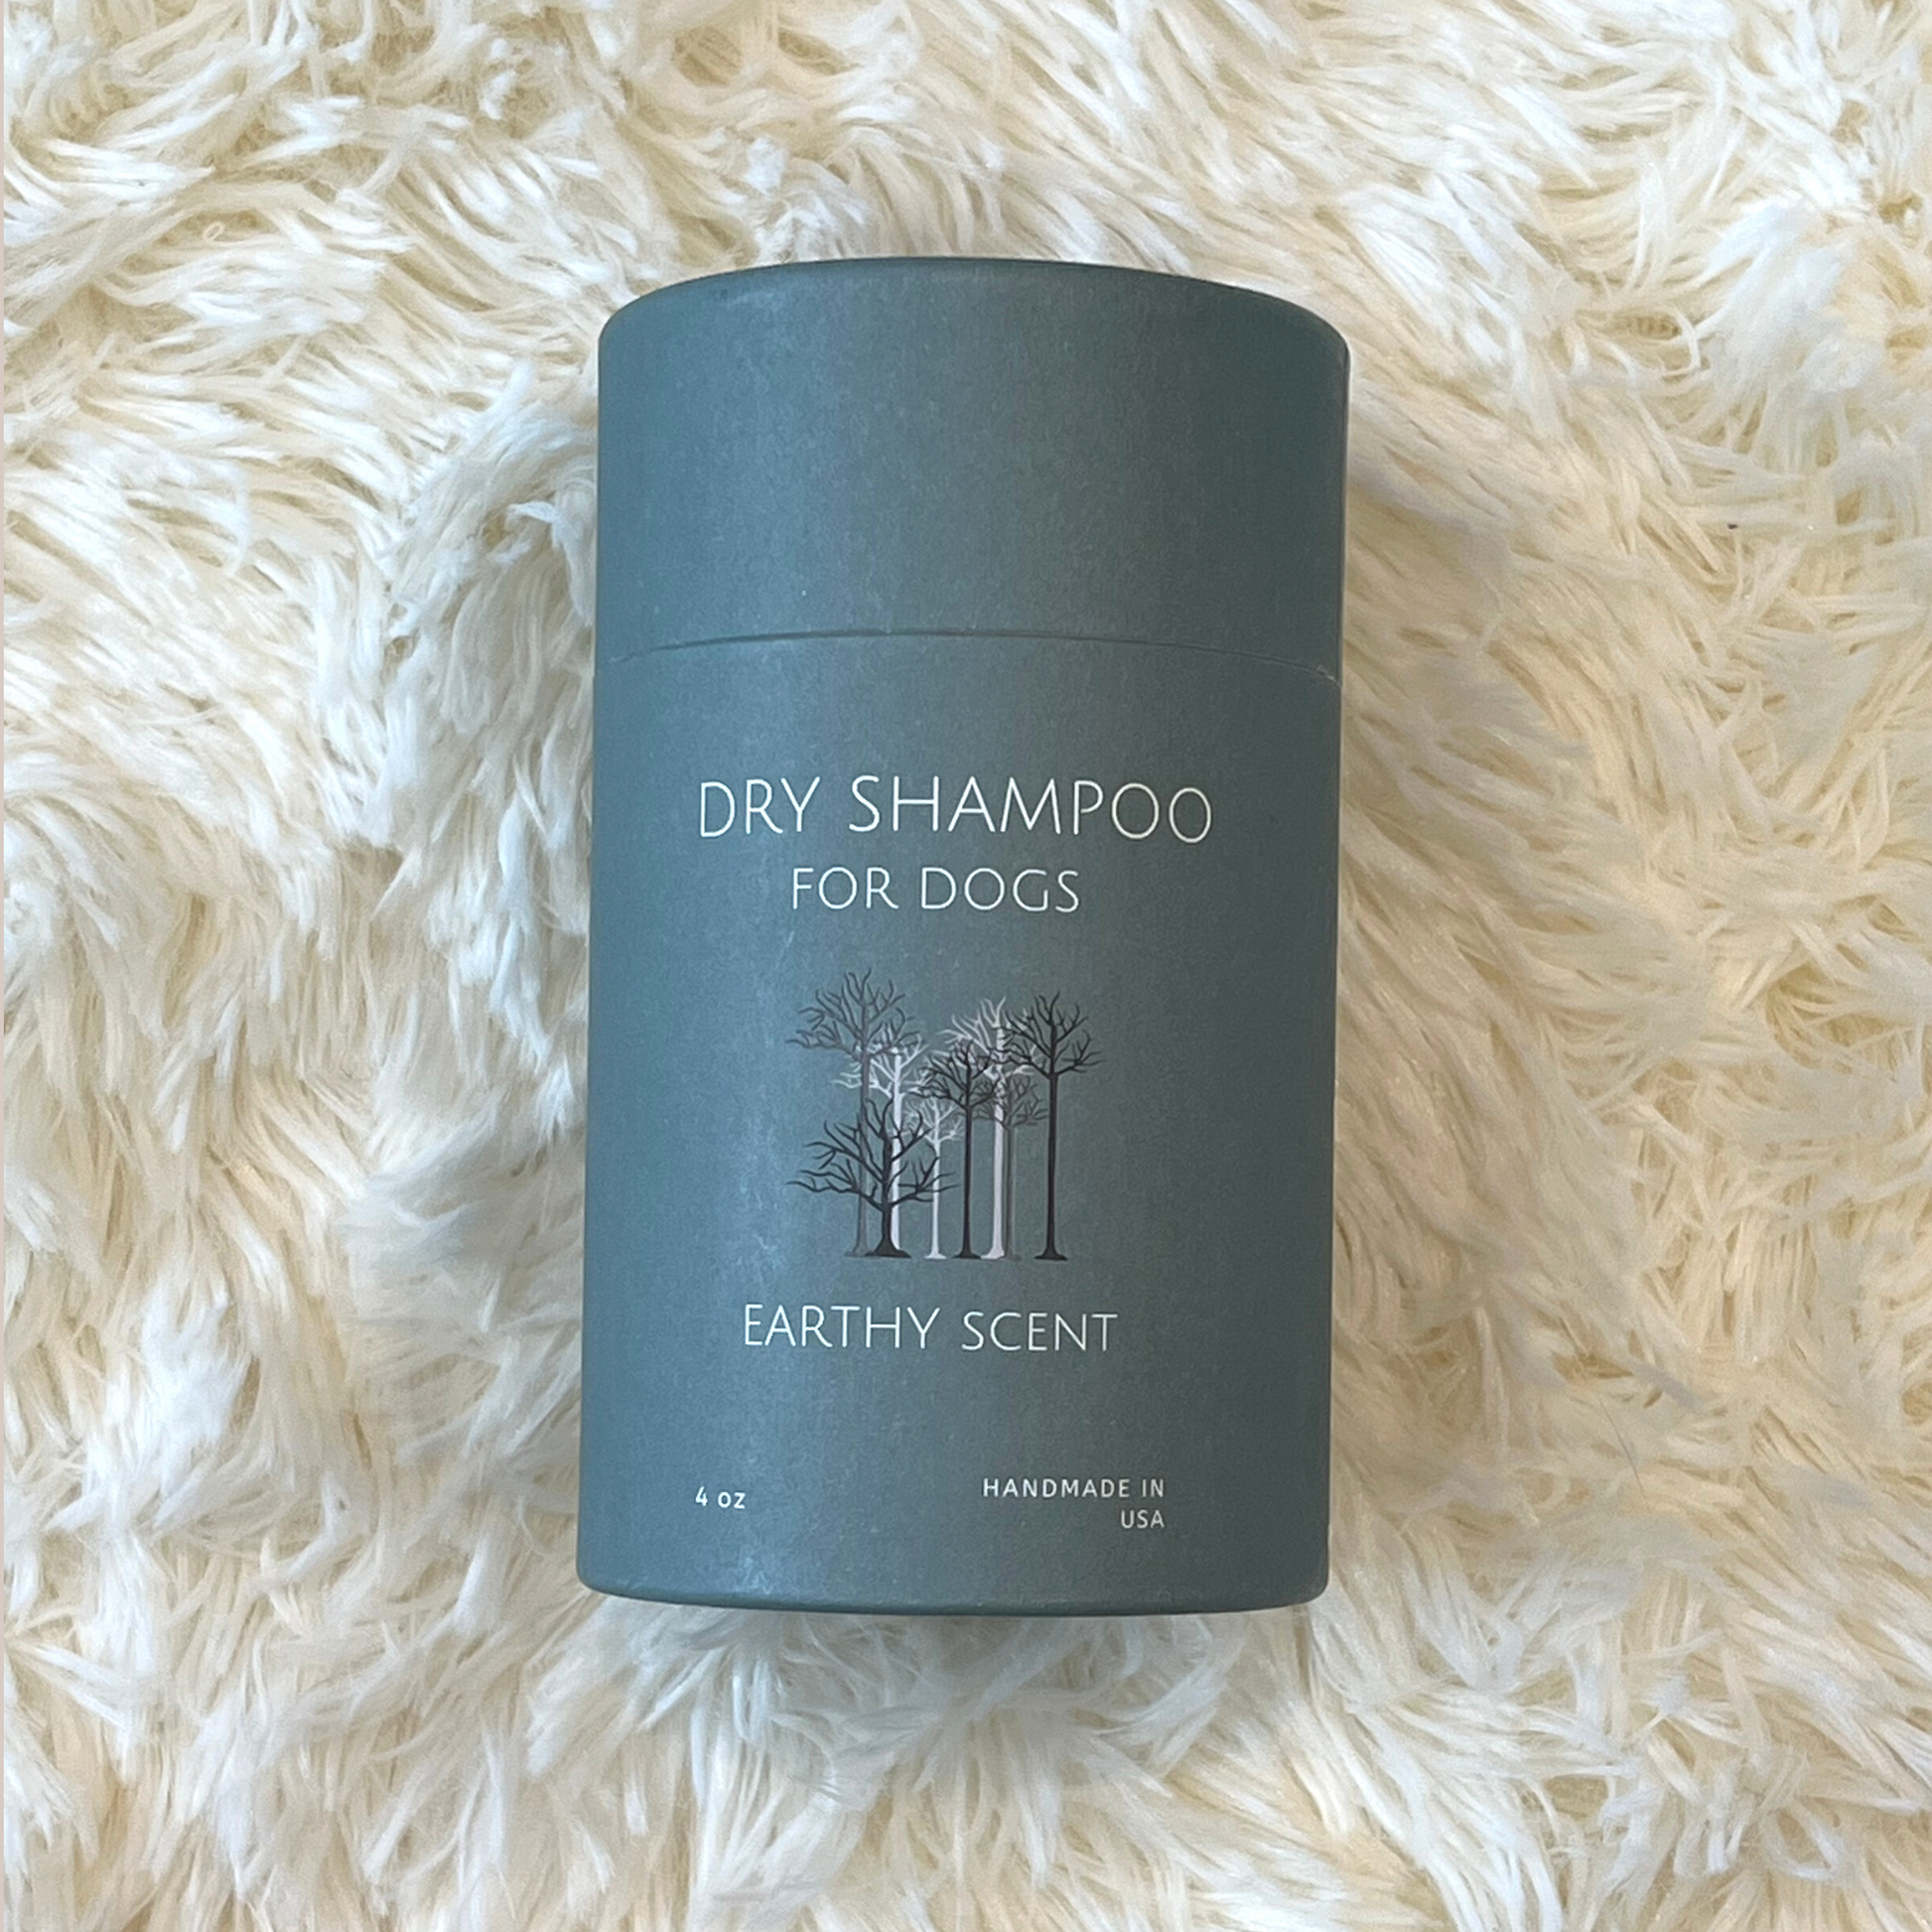 Green dry shampoo powder container, earthy scent